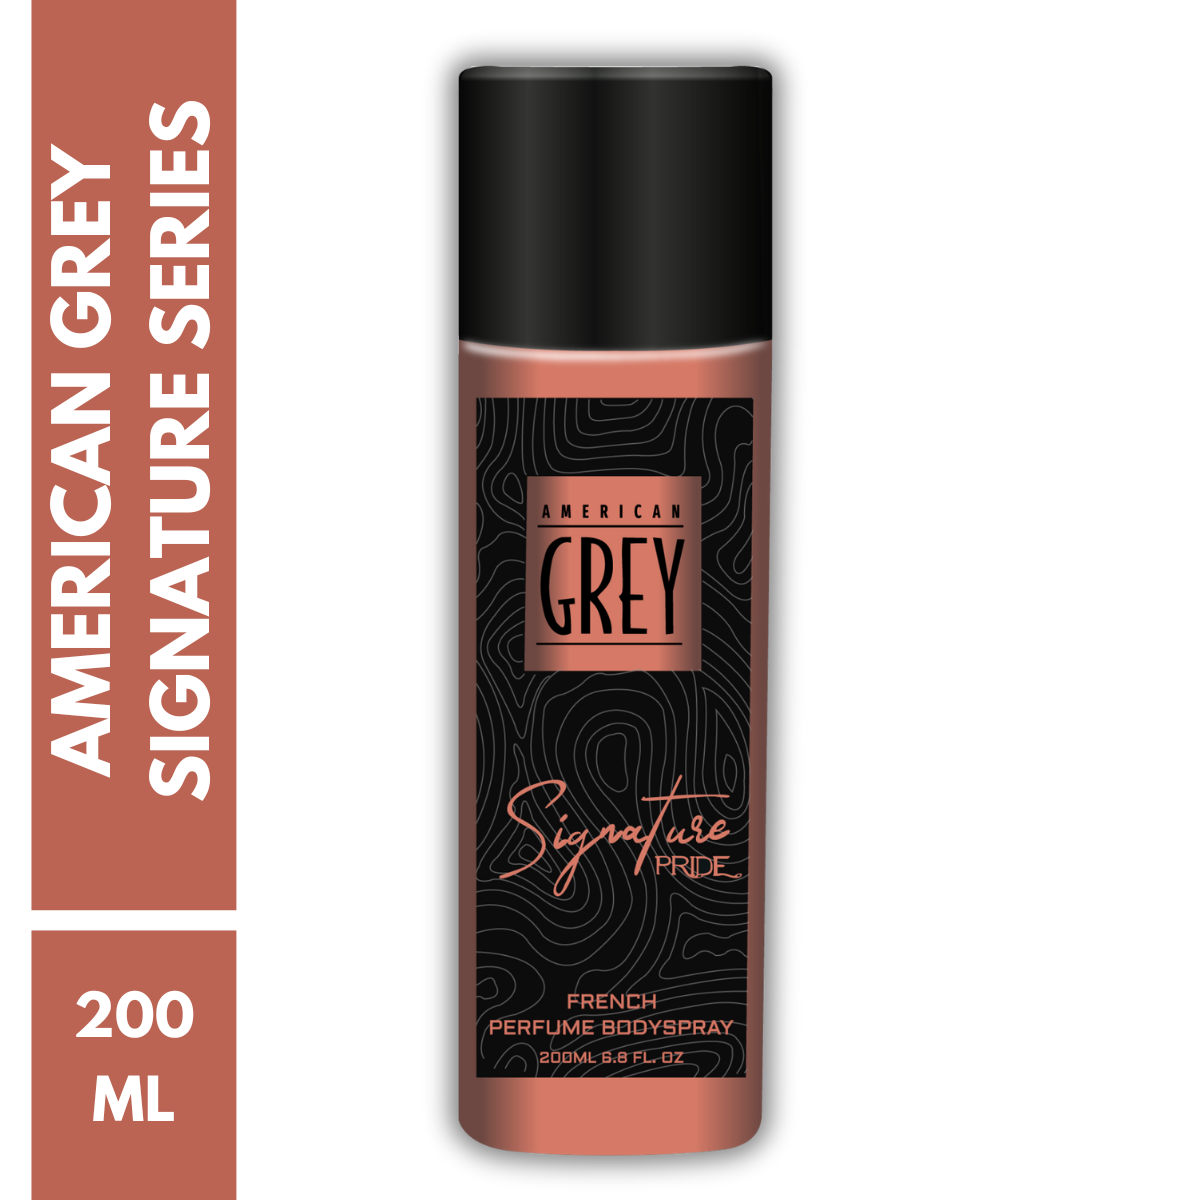 american grey signature pride, signature pride deo for Unisex, fruity deo for men, floral fragrance deo for men, floral smelling deo for men, long lasting deo for men,  escada moon sparkle dupe, escada moon sparkle replica, escada perfume spray, deo for men, deodorant for men, top deodorant for men, men deodorants at best price, buy deodorant for men online, best long lasting deo for men, best long lasting deodorant in india for male 2023, American grey deo, American grey signature series, signature pride deo, deo for him, deo for guys, deo for boyfriend, deo for BF, deo for BFF, men grooming essential, men fragrance for summer season, best deo for hot weather, popular summer deodorant for men, best smelling deo for summer season, popular evening wear